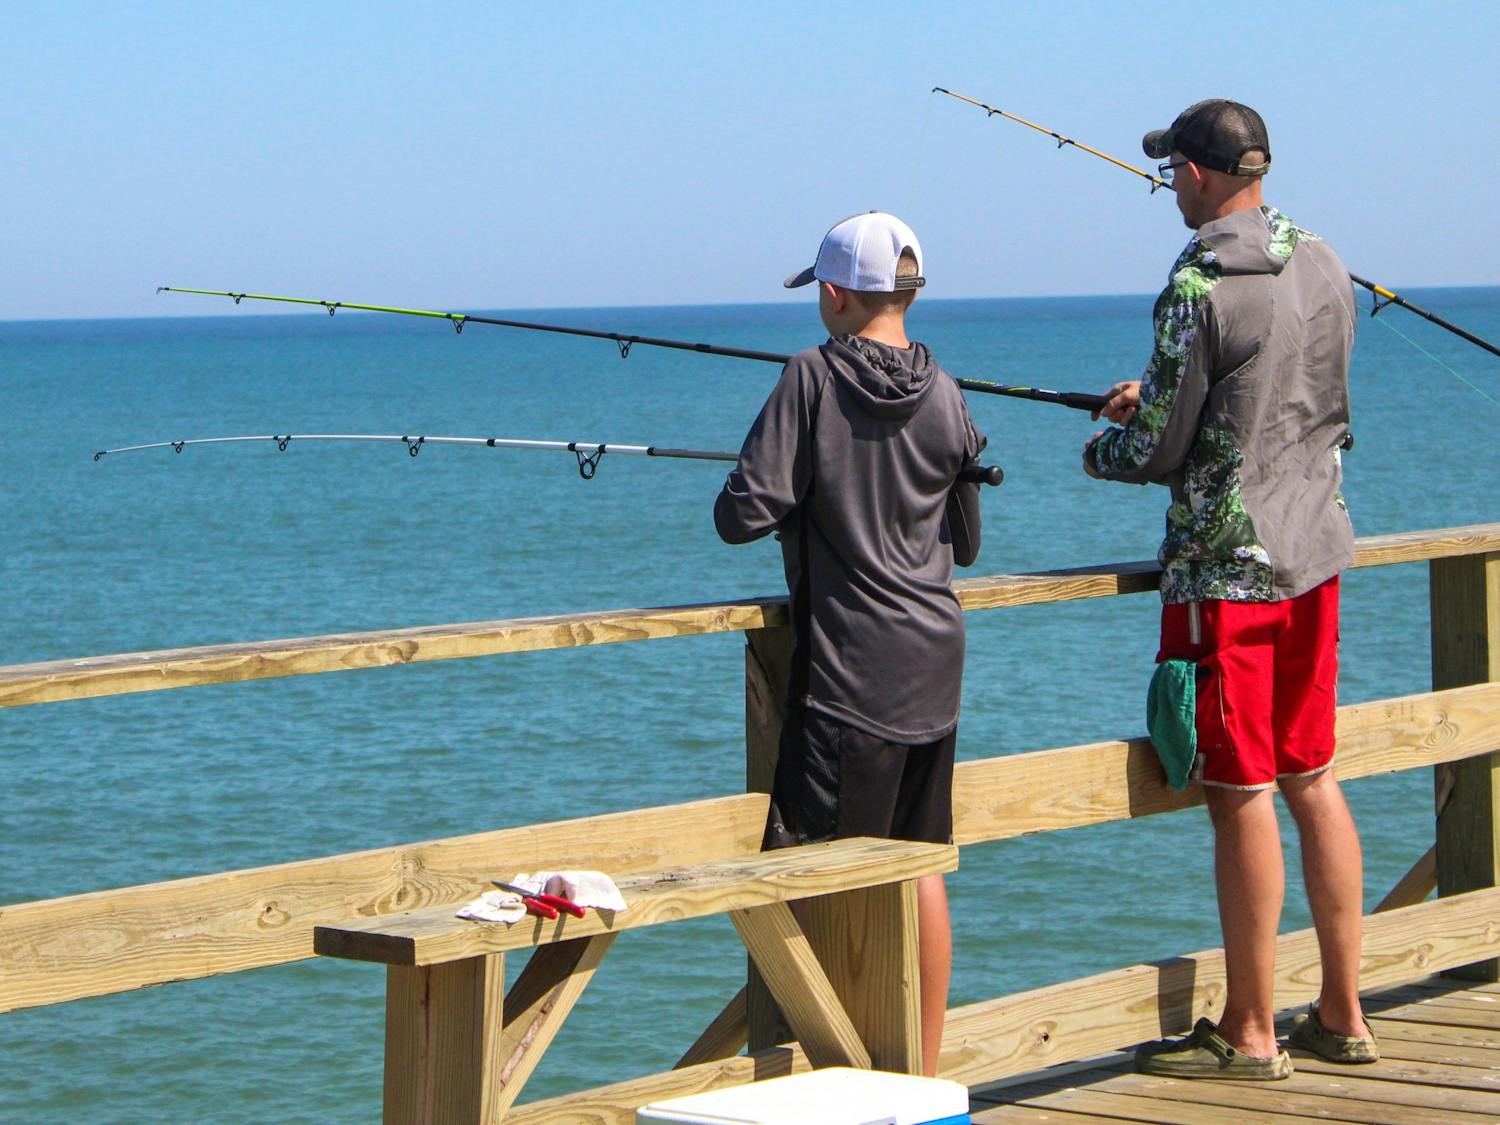 A pier at Kure Beach gathers many groups of family and friends who fish together during a late afternoon on Oct. 8, 2020.